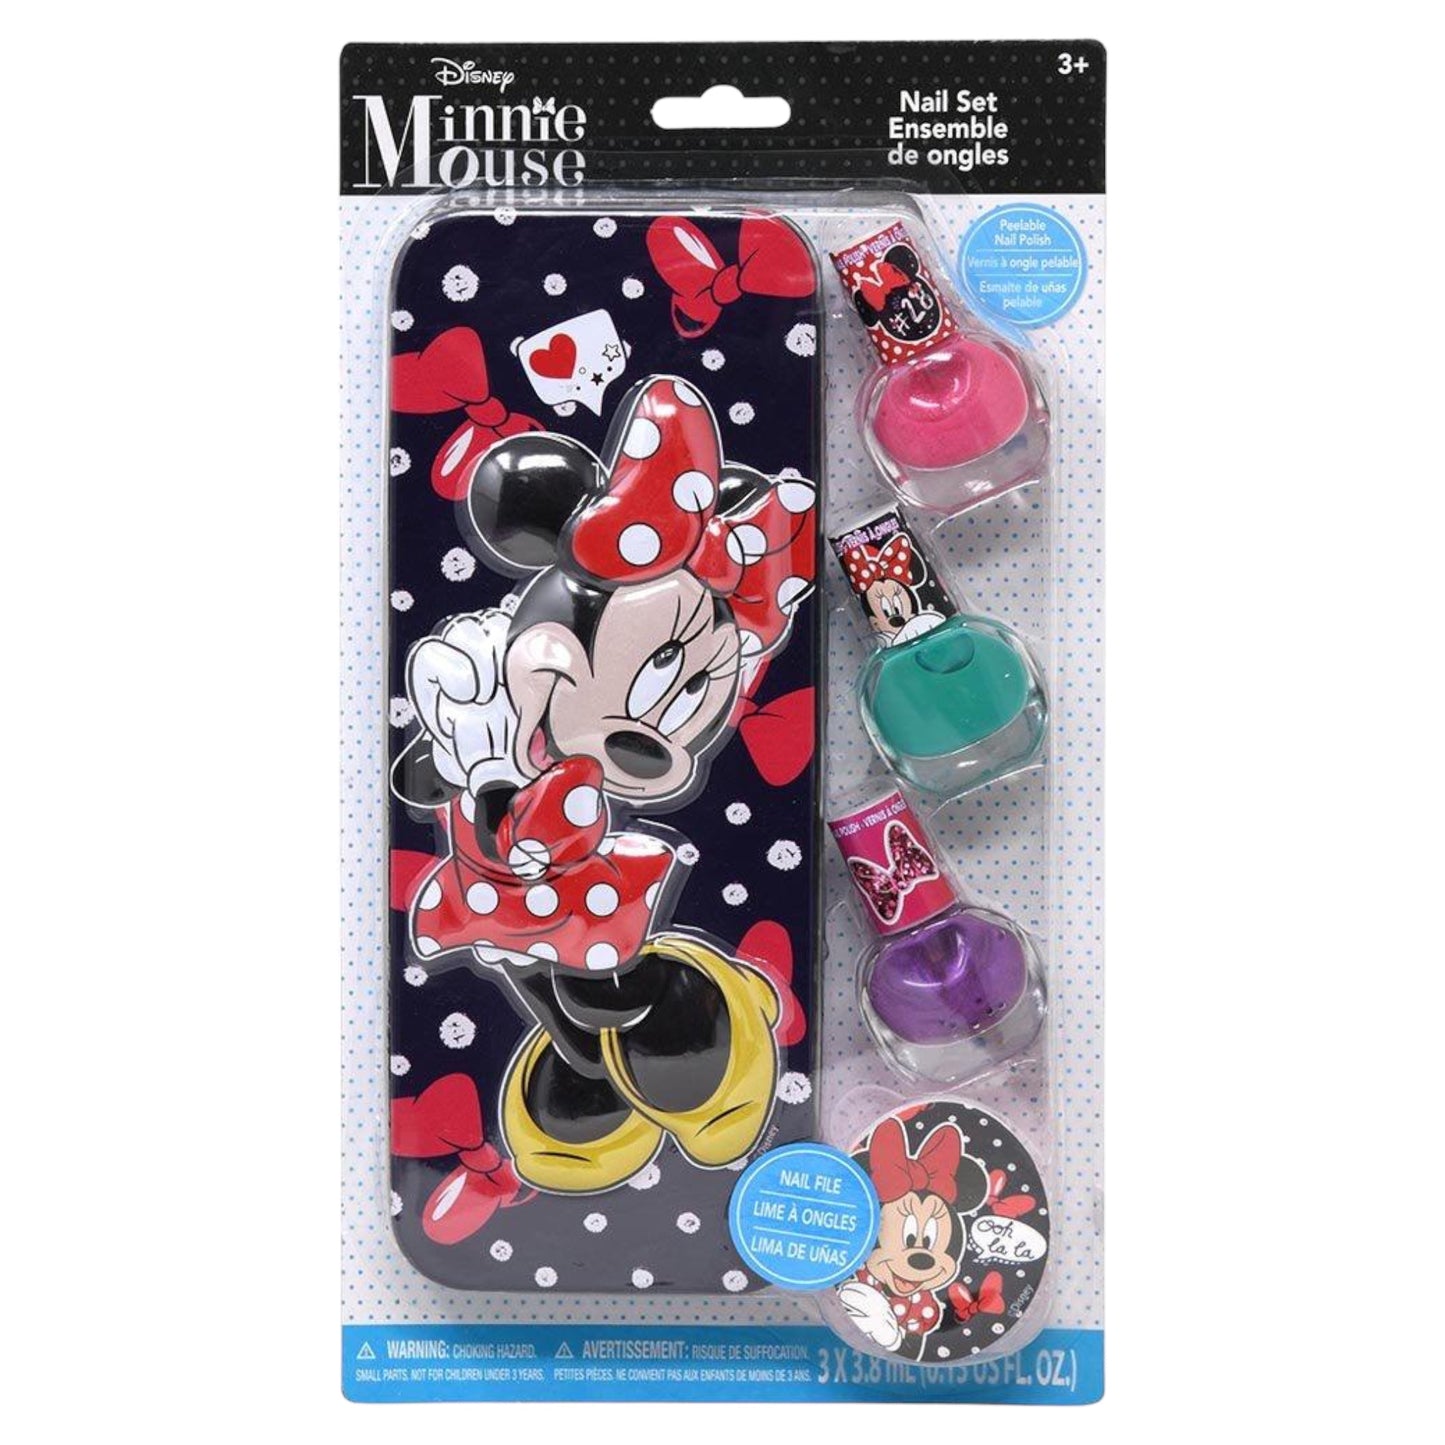 DISNEY MINNIE MOUSE NAIL SET WITH TIN CASE UPDMB1058GB R121